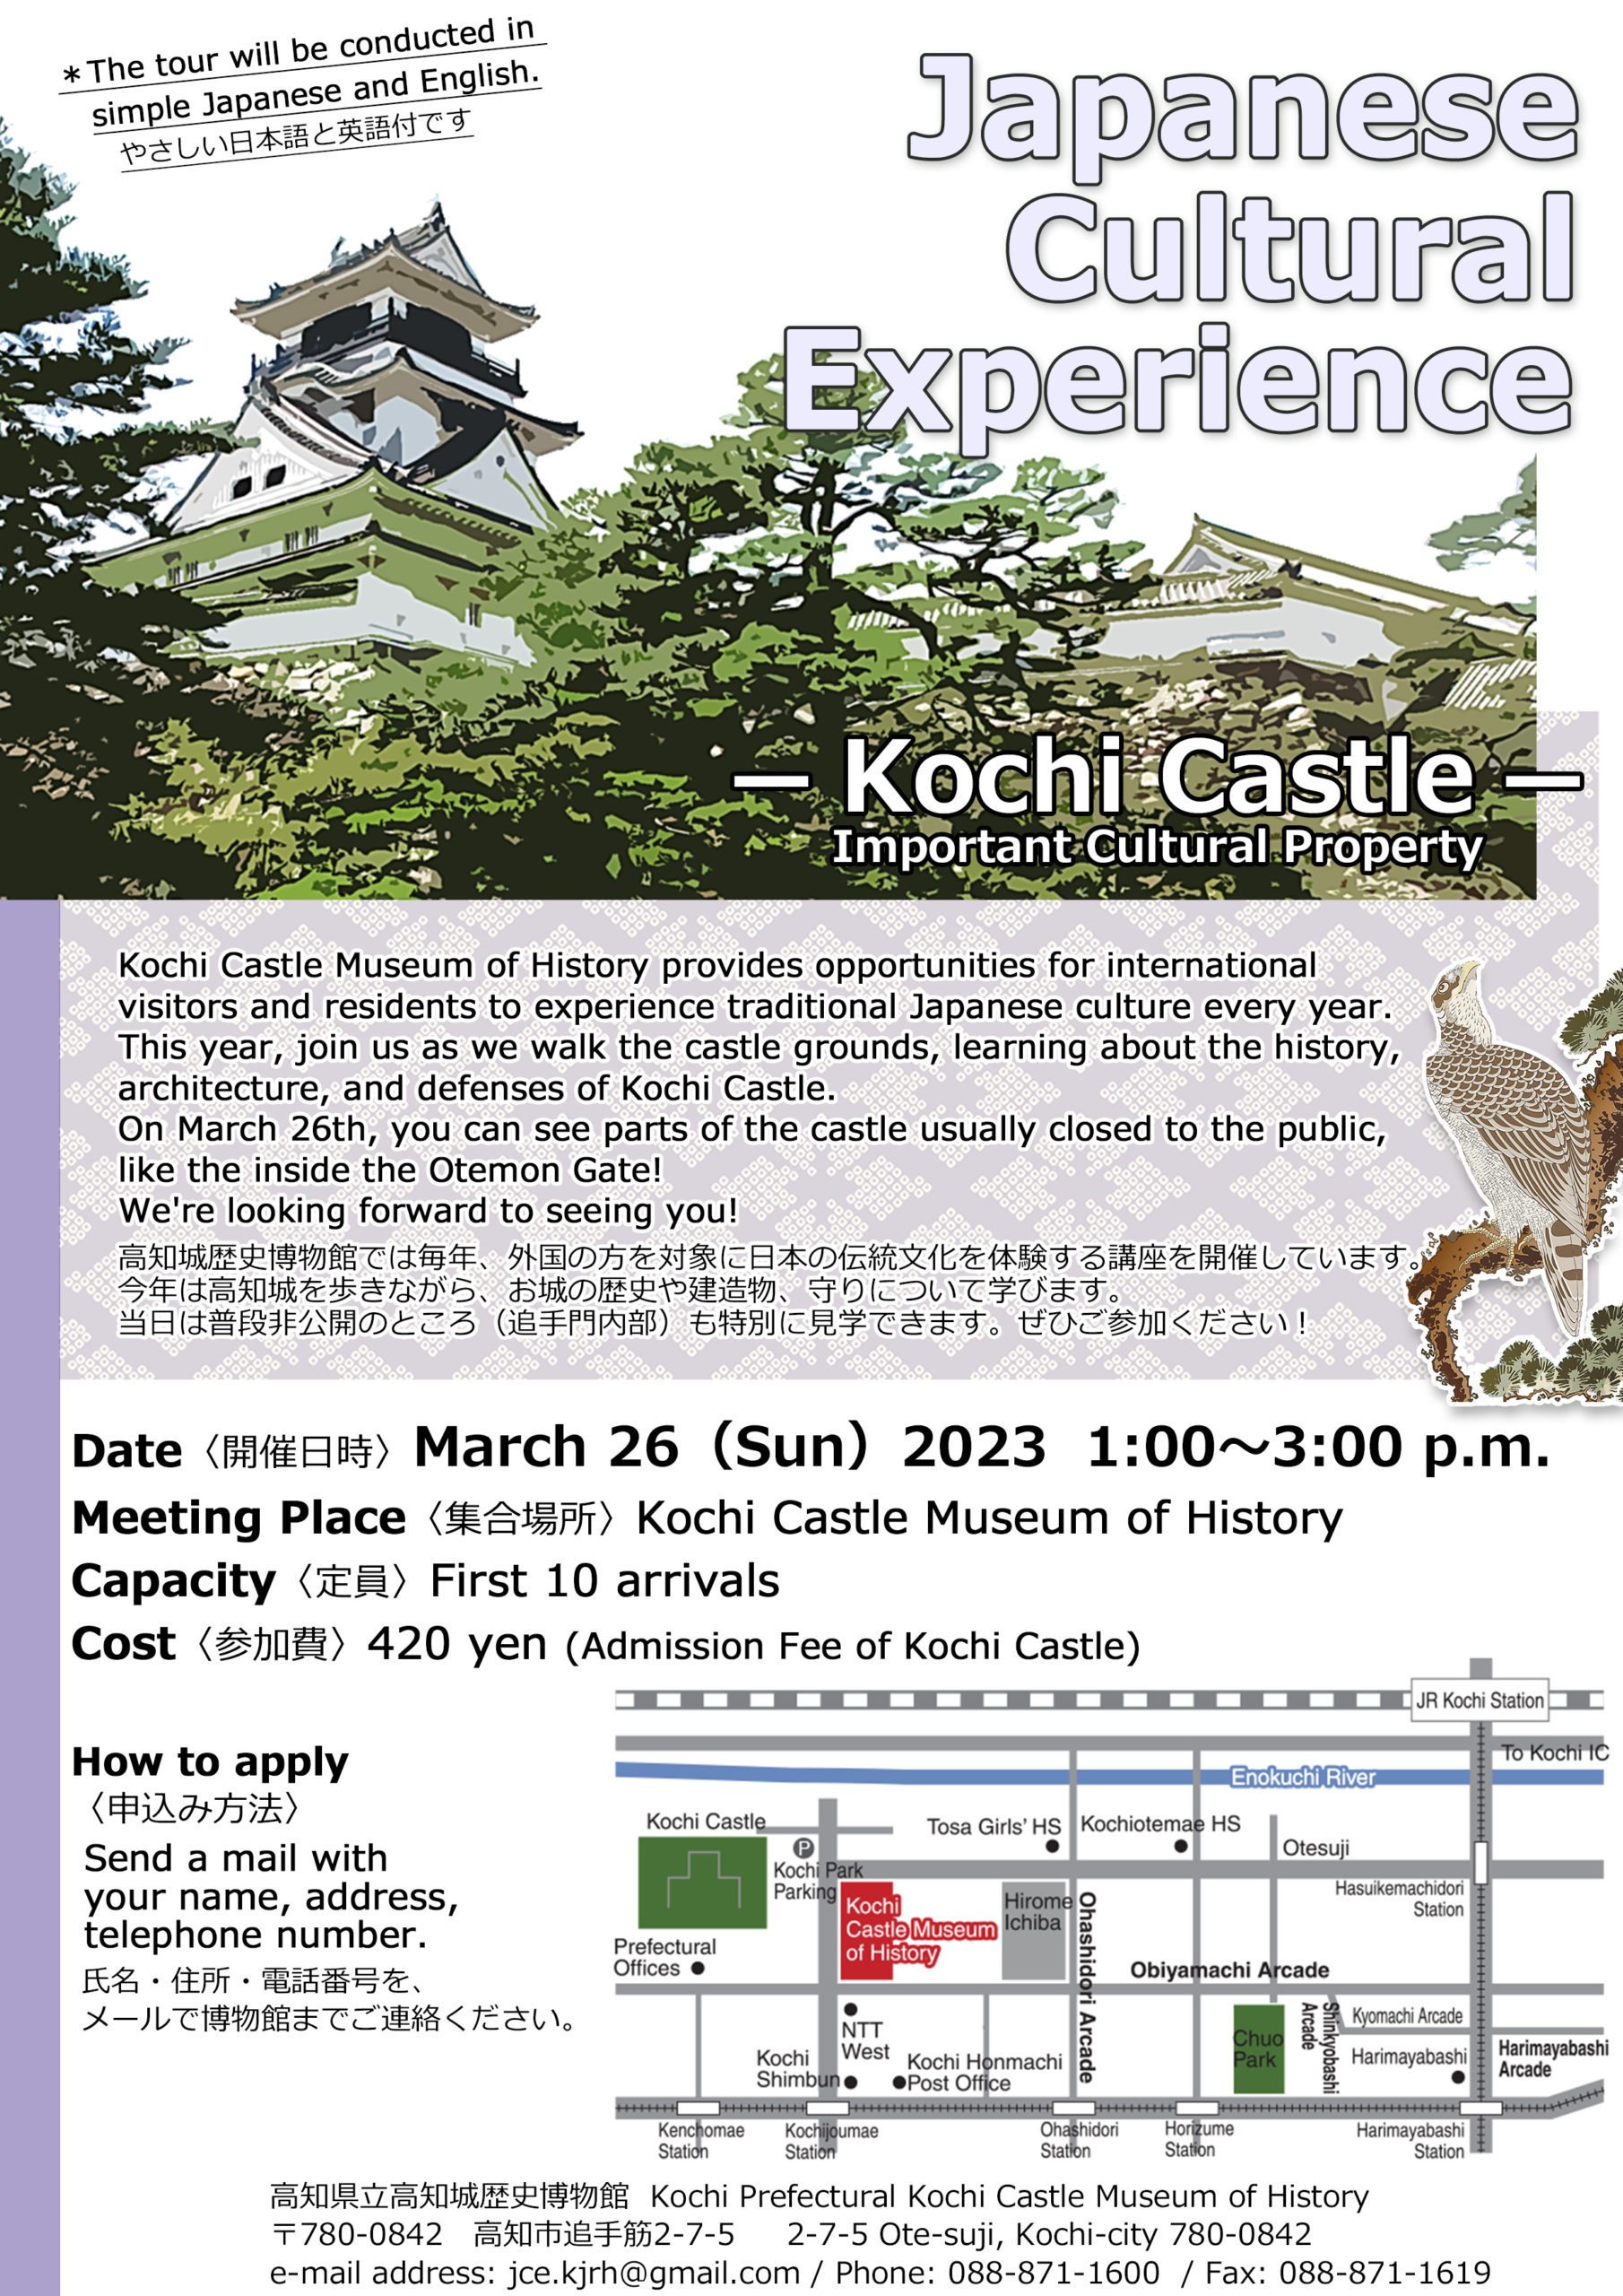 Japanese Cultural Experience　～Kochi Castle(Important Cultural Property)～